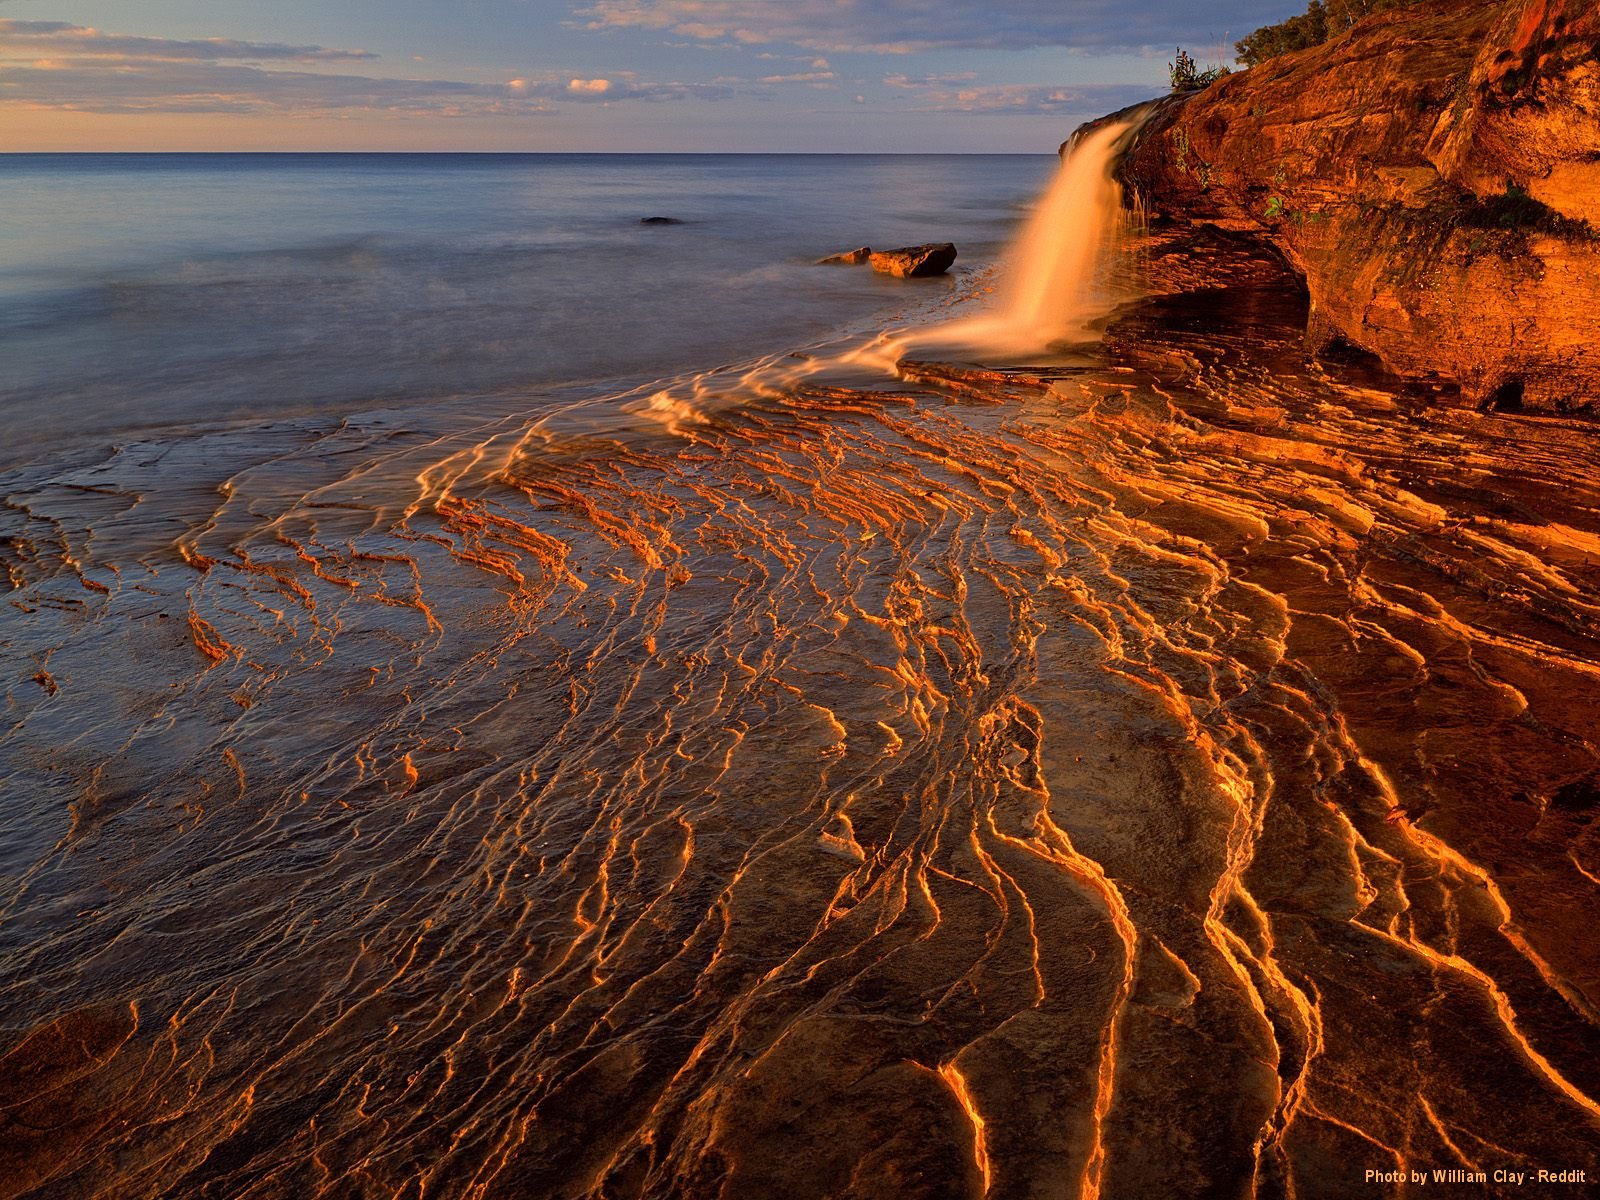 pictured rocks national lakeshore - Phot by William Clay Reddit